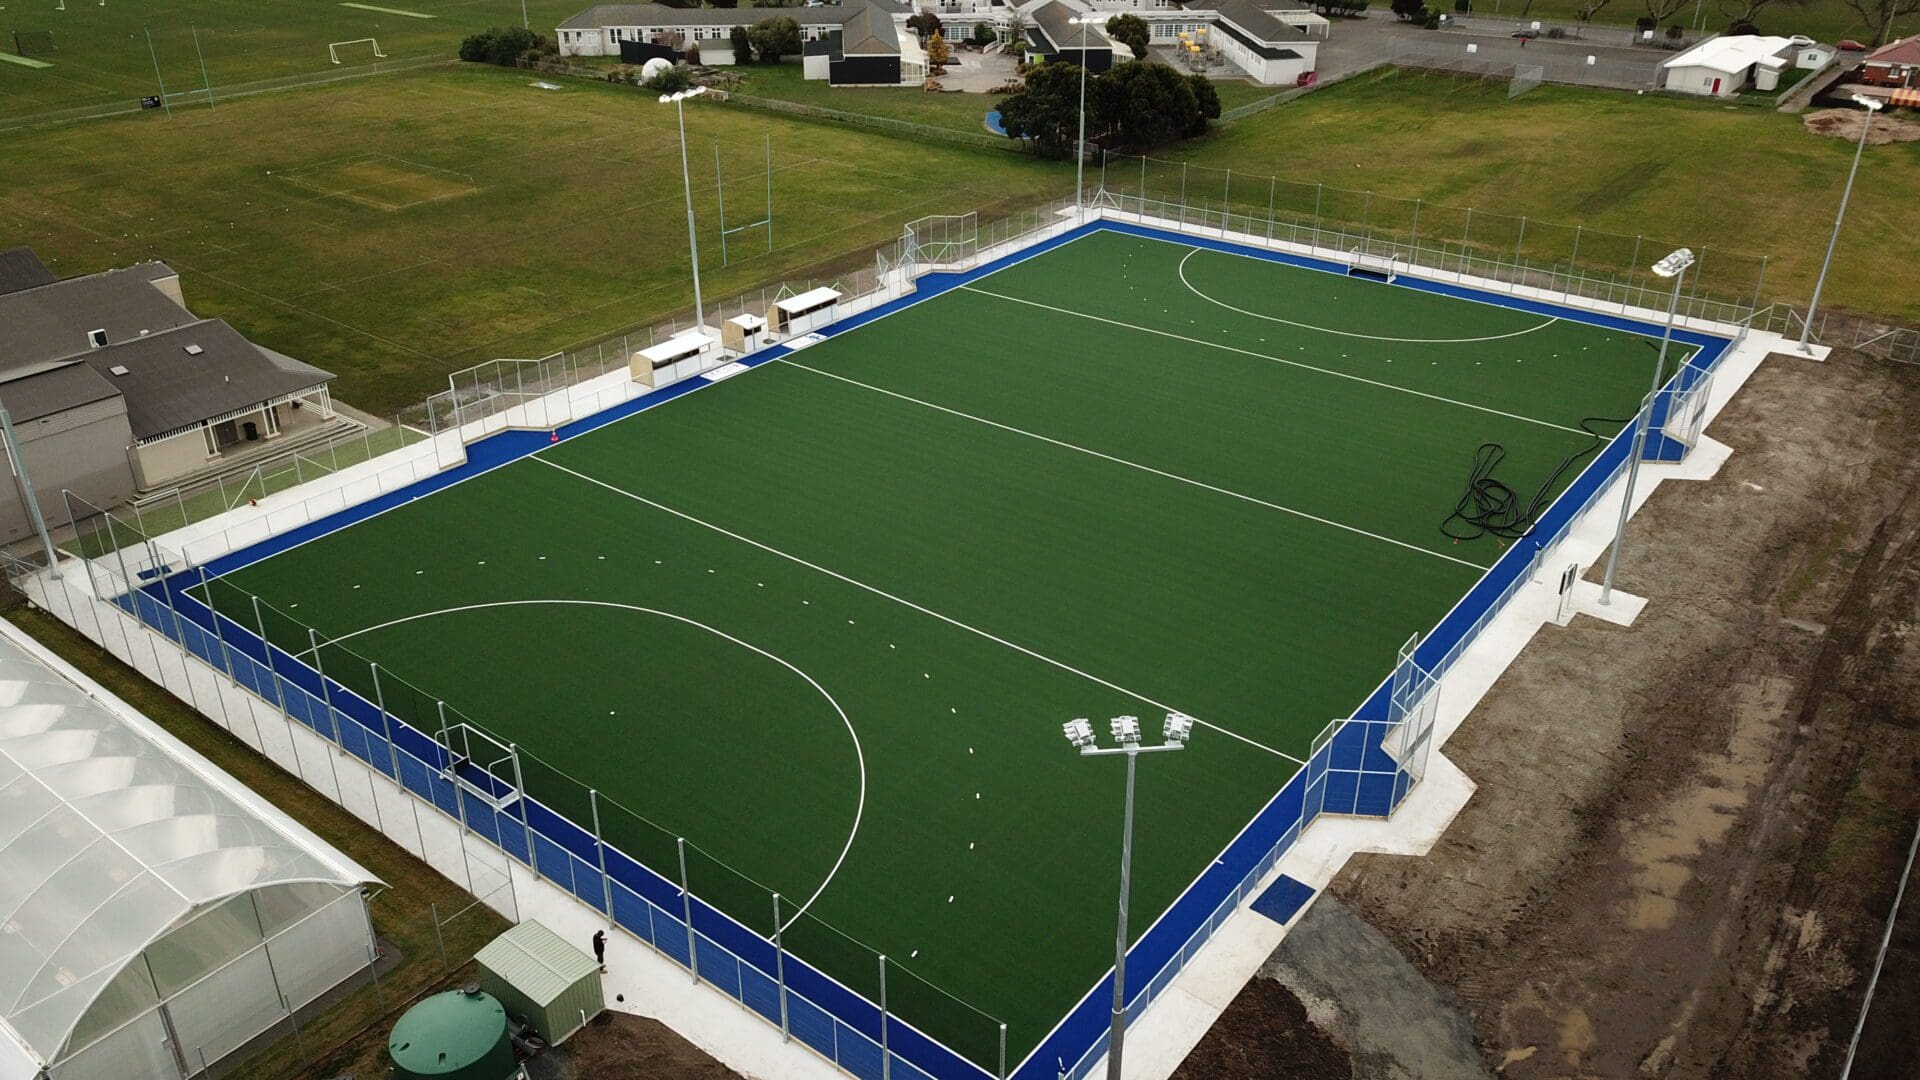 Otago Hockey prioritised easy access, adequate car parking and sustainable infrastructure